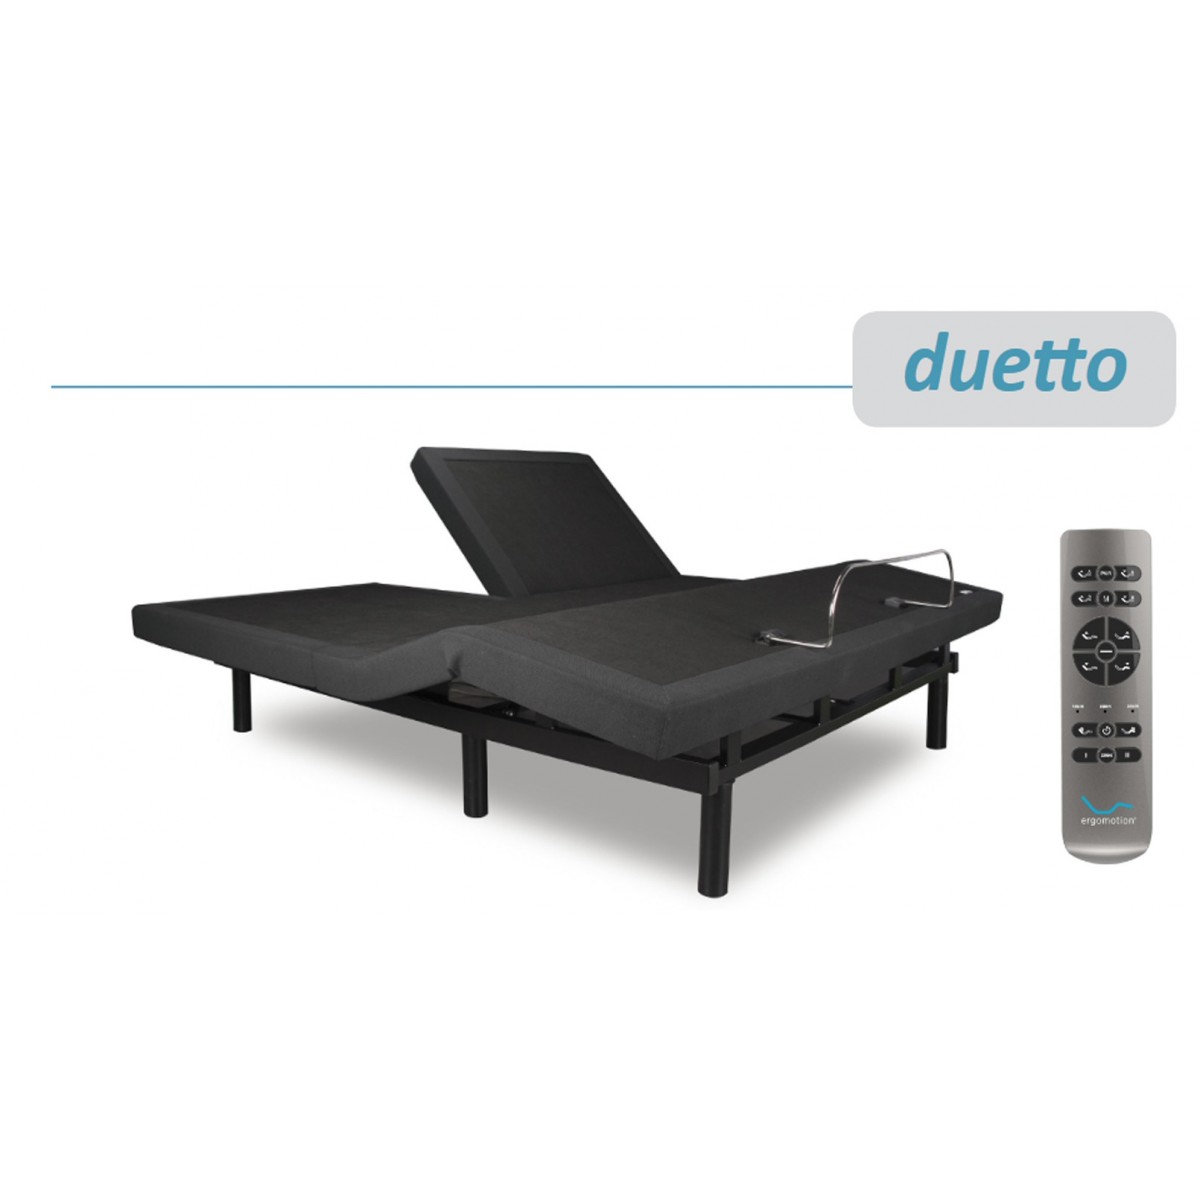 Duetto Electric Adjustable Bed